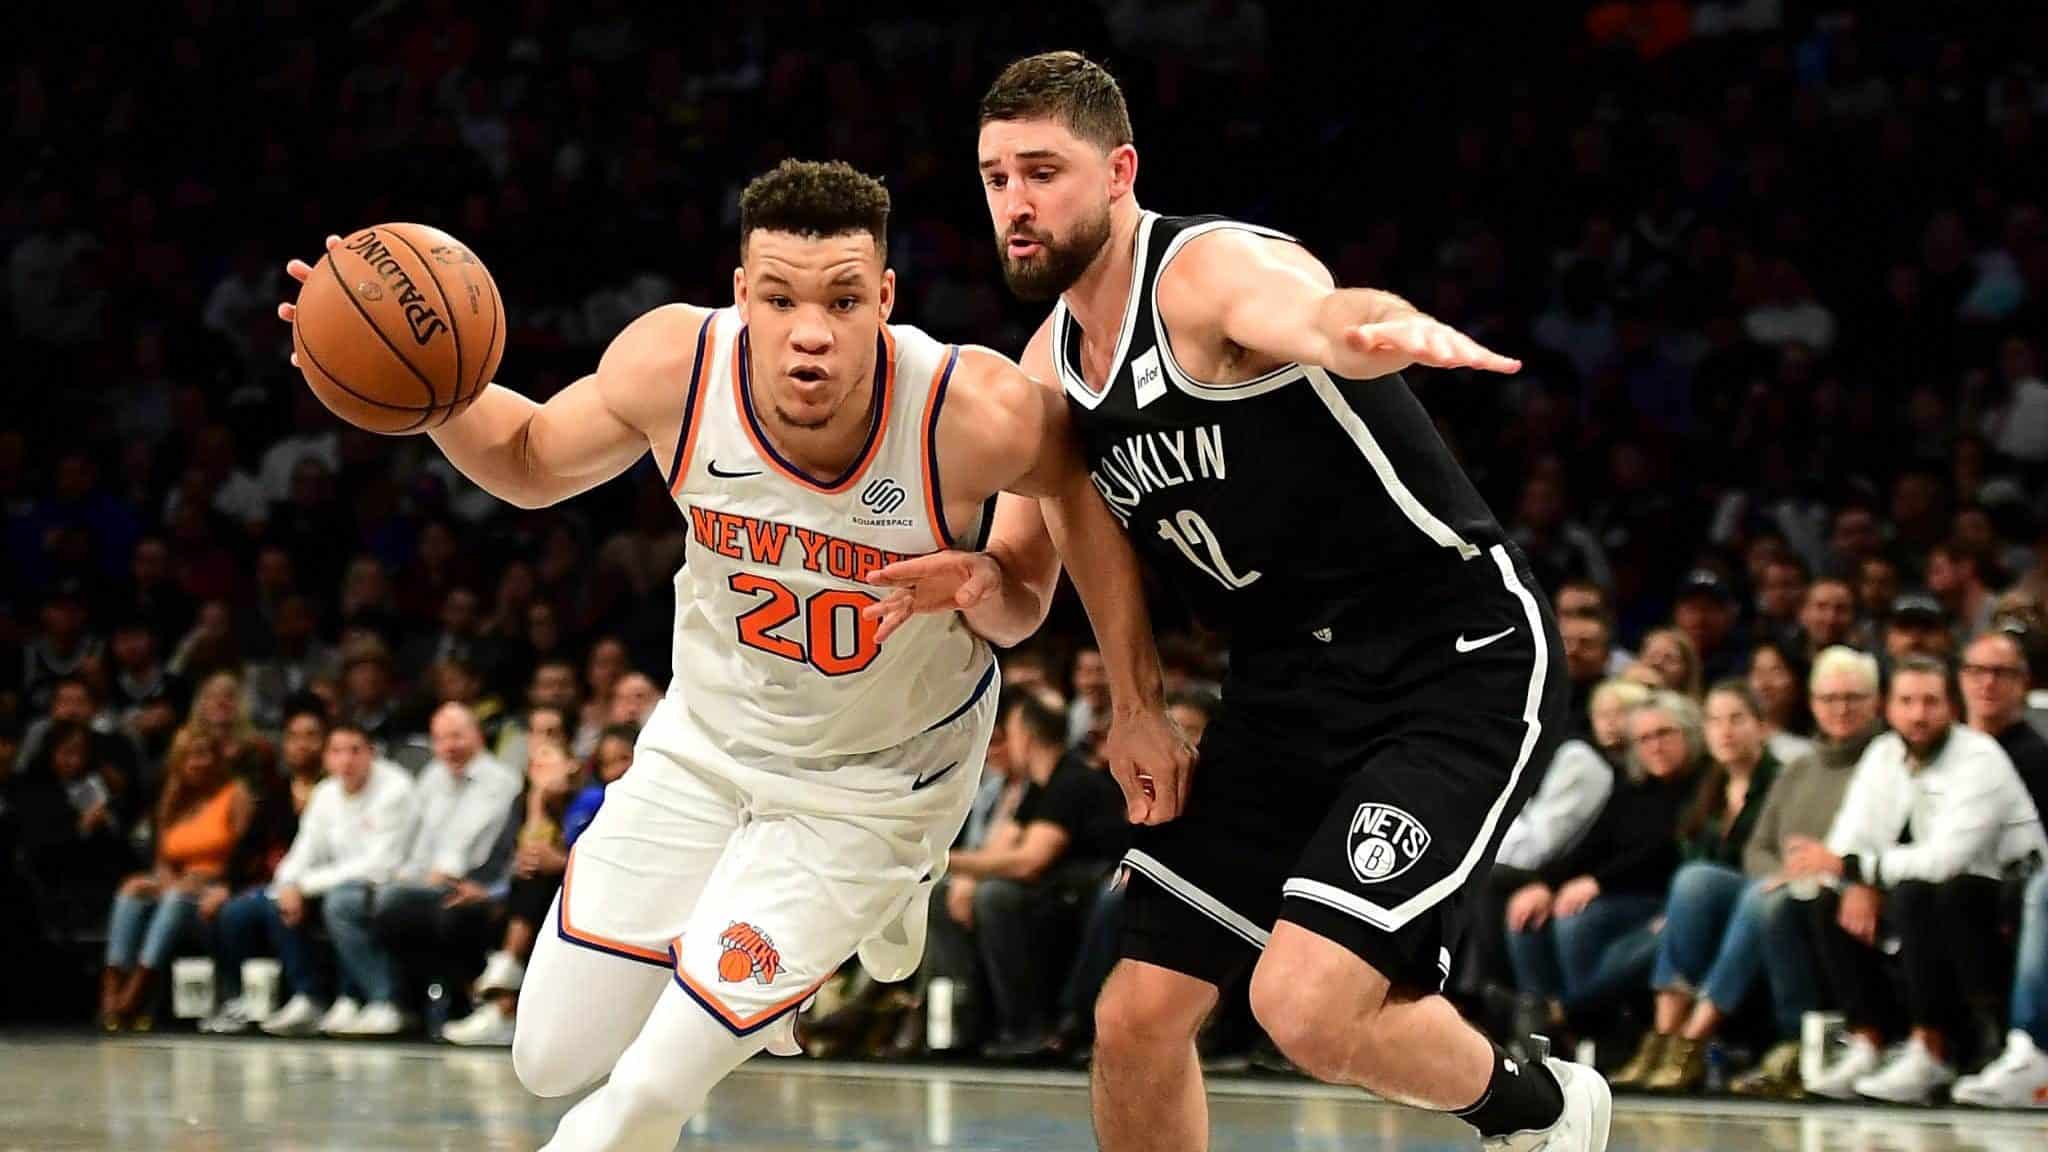 NEW YORK, NEW YORK - OCTOBER 25: Joe Harris #12 of the Brooklyn Nets guards Kevin Knox II #20 of the New York Knicks as he dribbles the ball during the second half of their game at Barclays Center on October 25, 2019 in the Brooklyn borough of New York City. NOTE TO USER: User expressly acknowledges and agrees that, by downloading and or using this photograph, User is consenting to the terms and conditions of the Getty Images License Agreement.